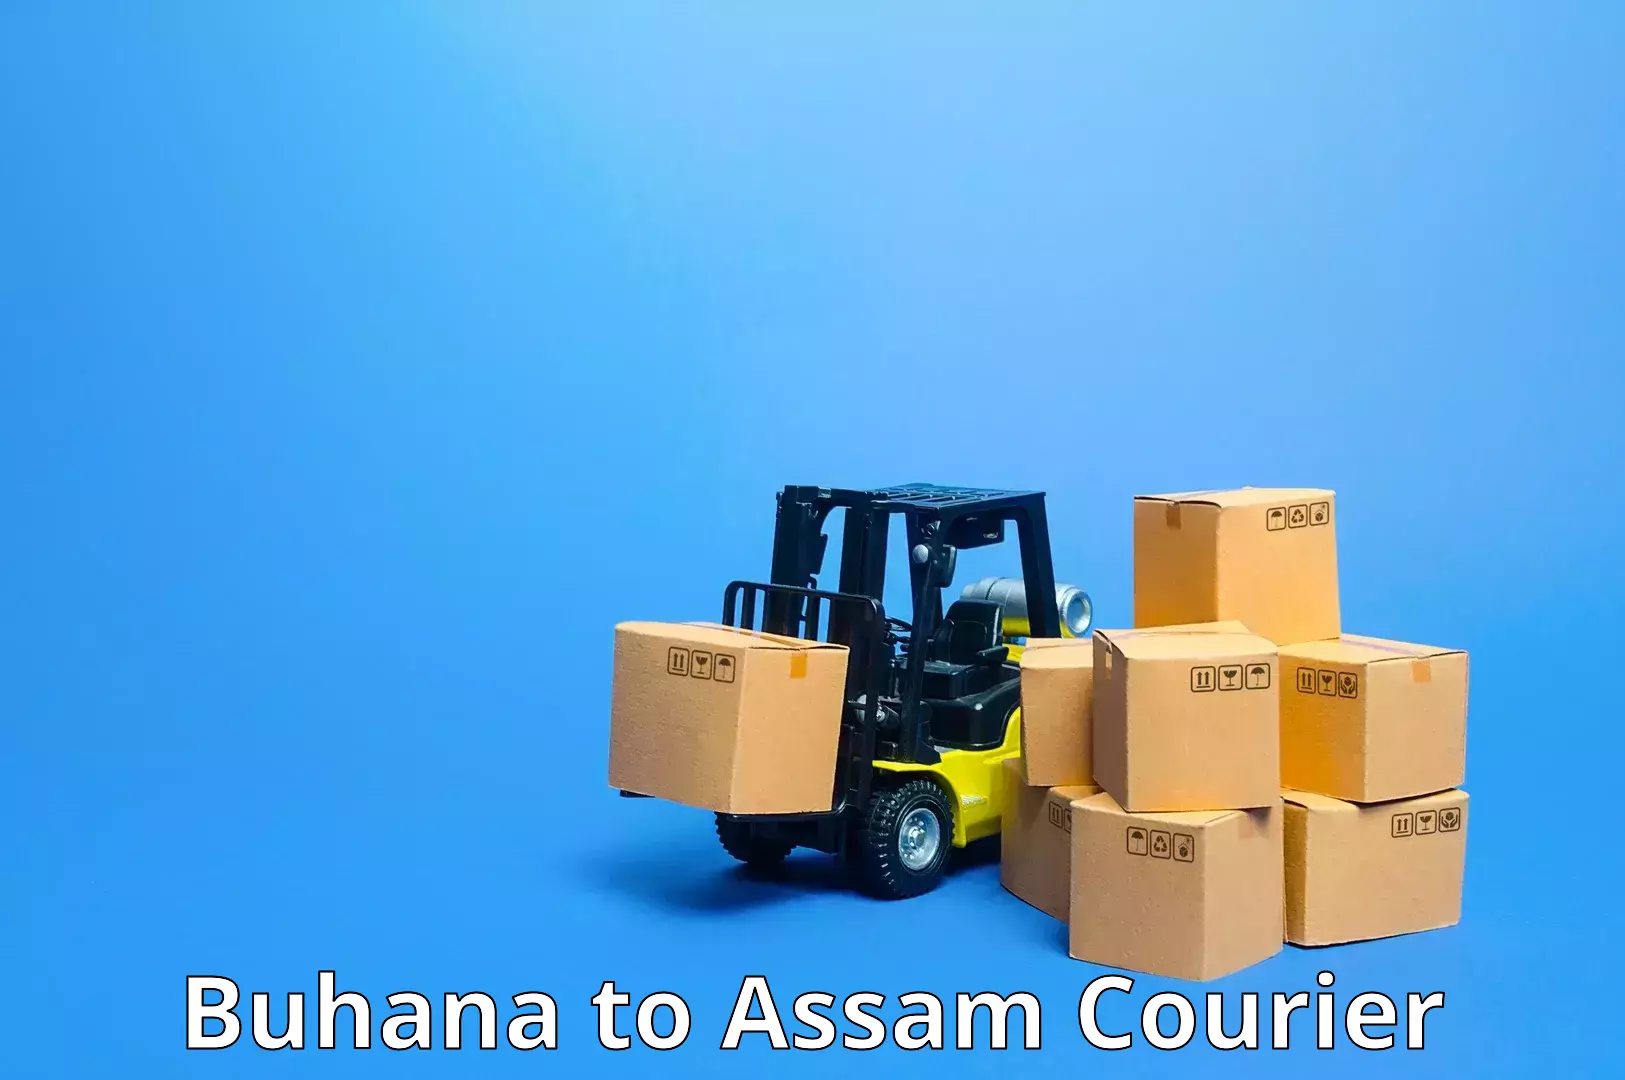 On-call courier service Buhana to Assam